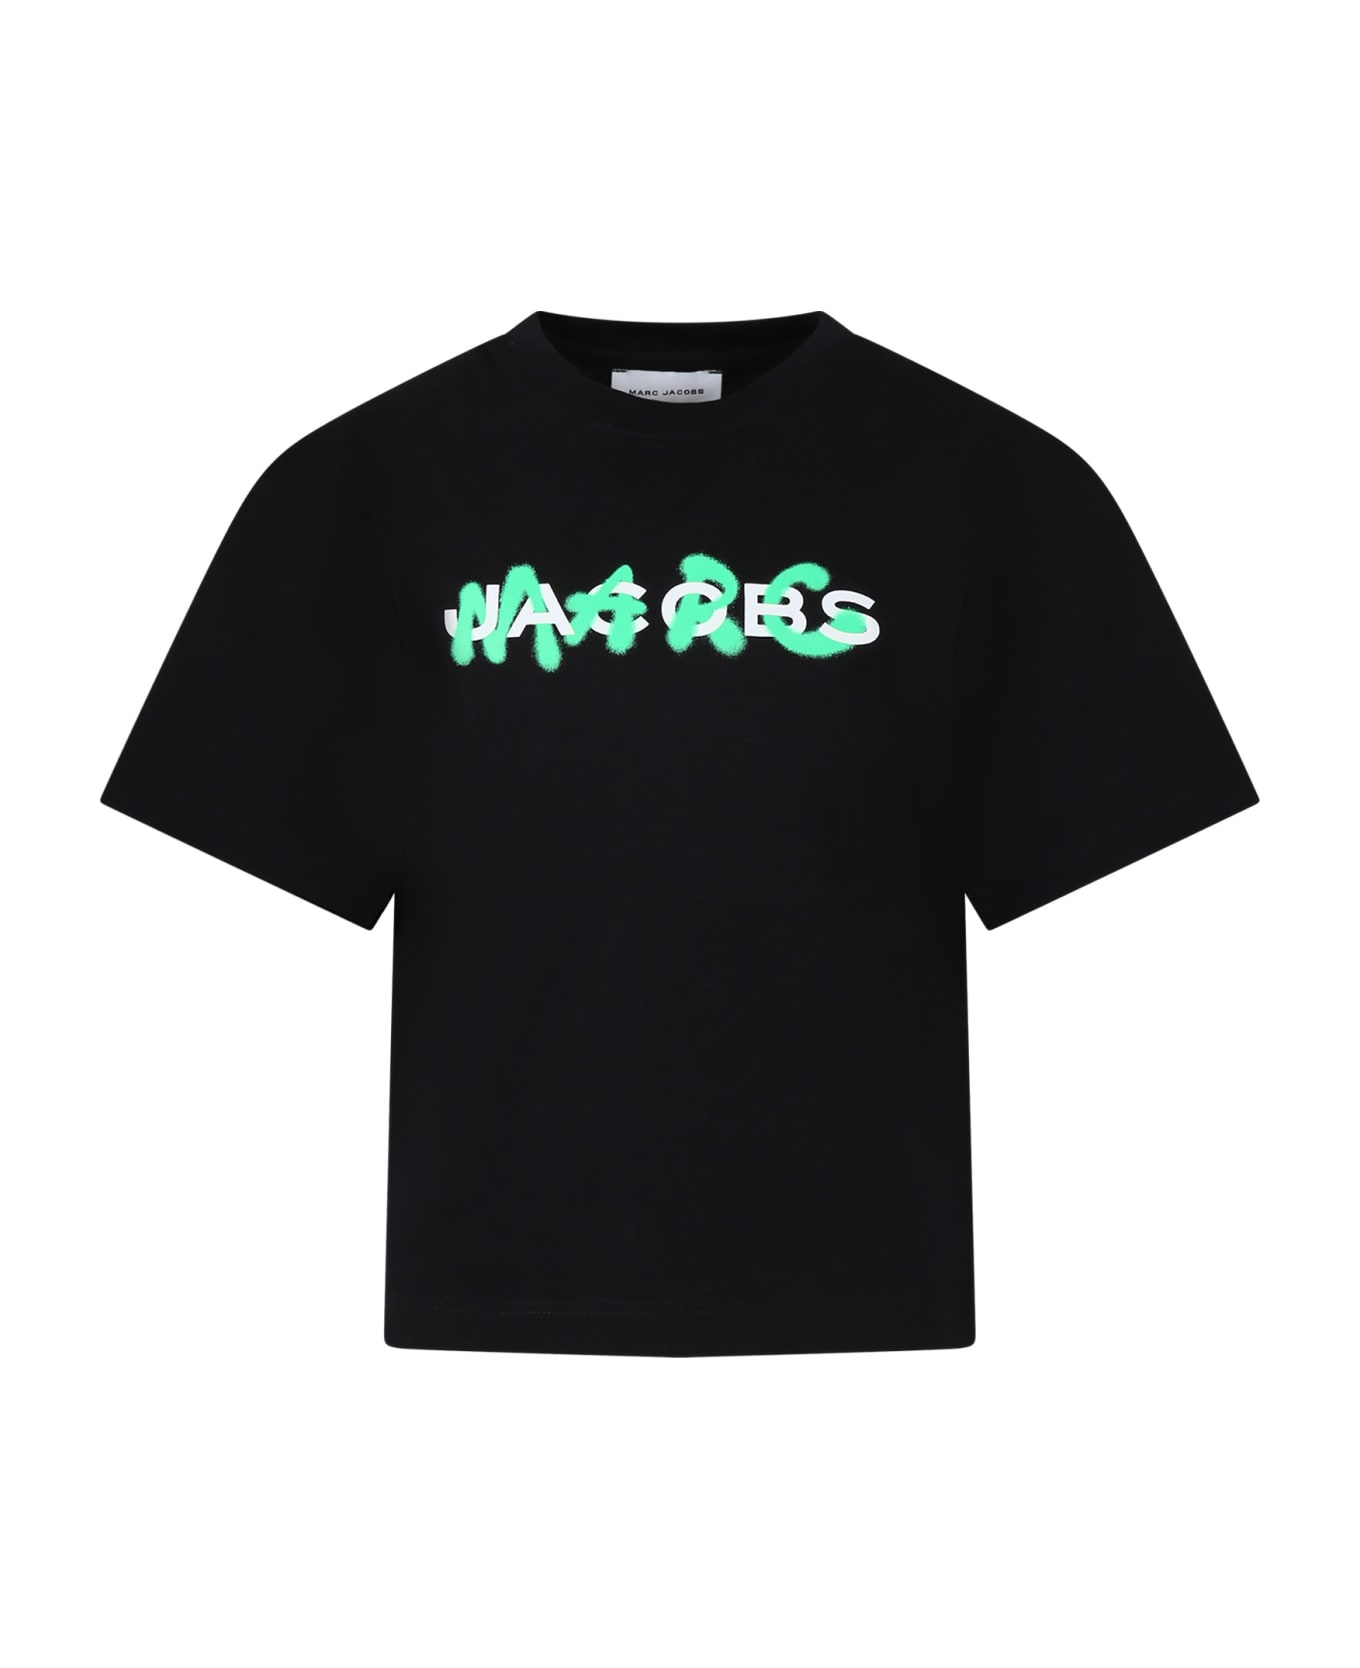 Marc Jacobs Black T-shirt For Kids With Logo - Nero